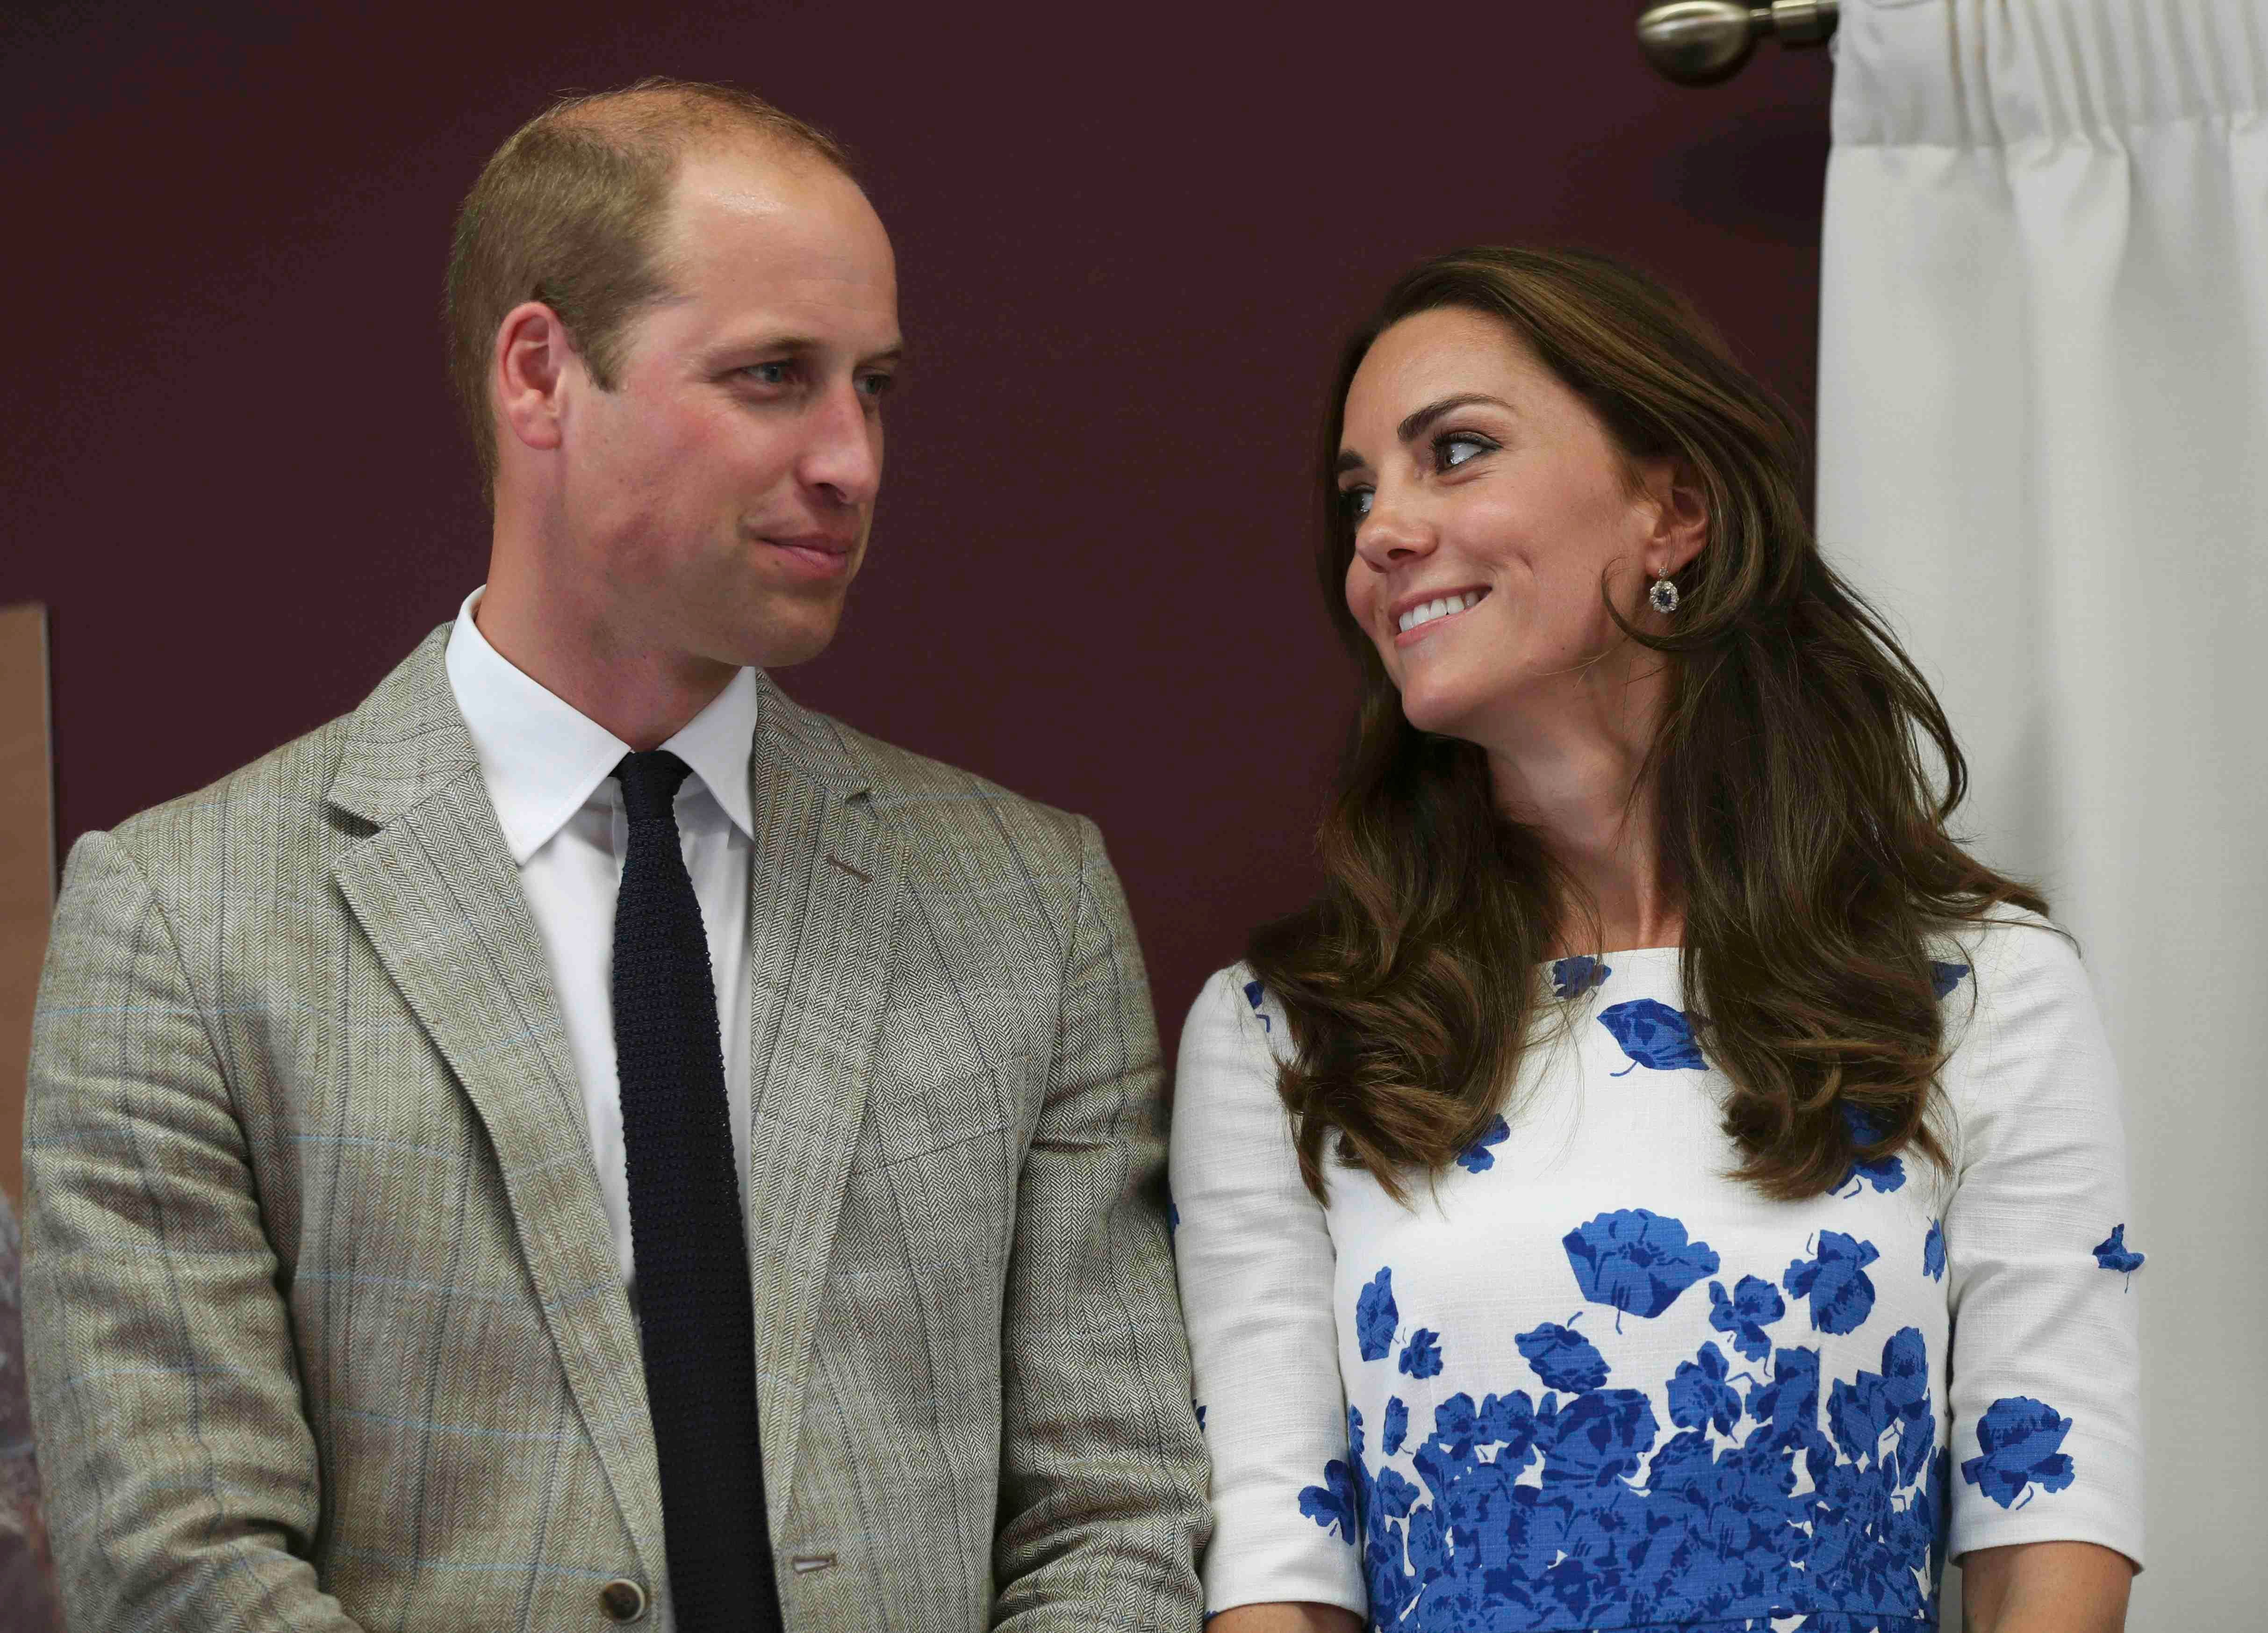 Prince William and Duchess of Kate during their visit to Keech Hospice Care on August 24, 2016, in Luton, England | Source: Getty Images